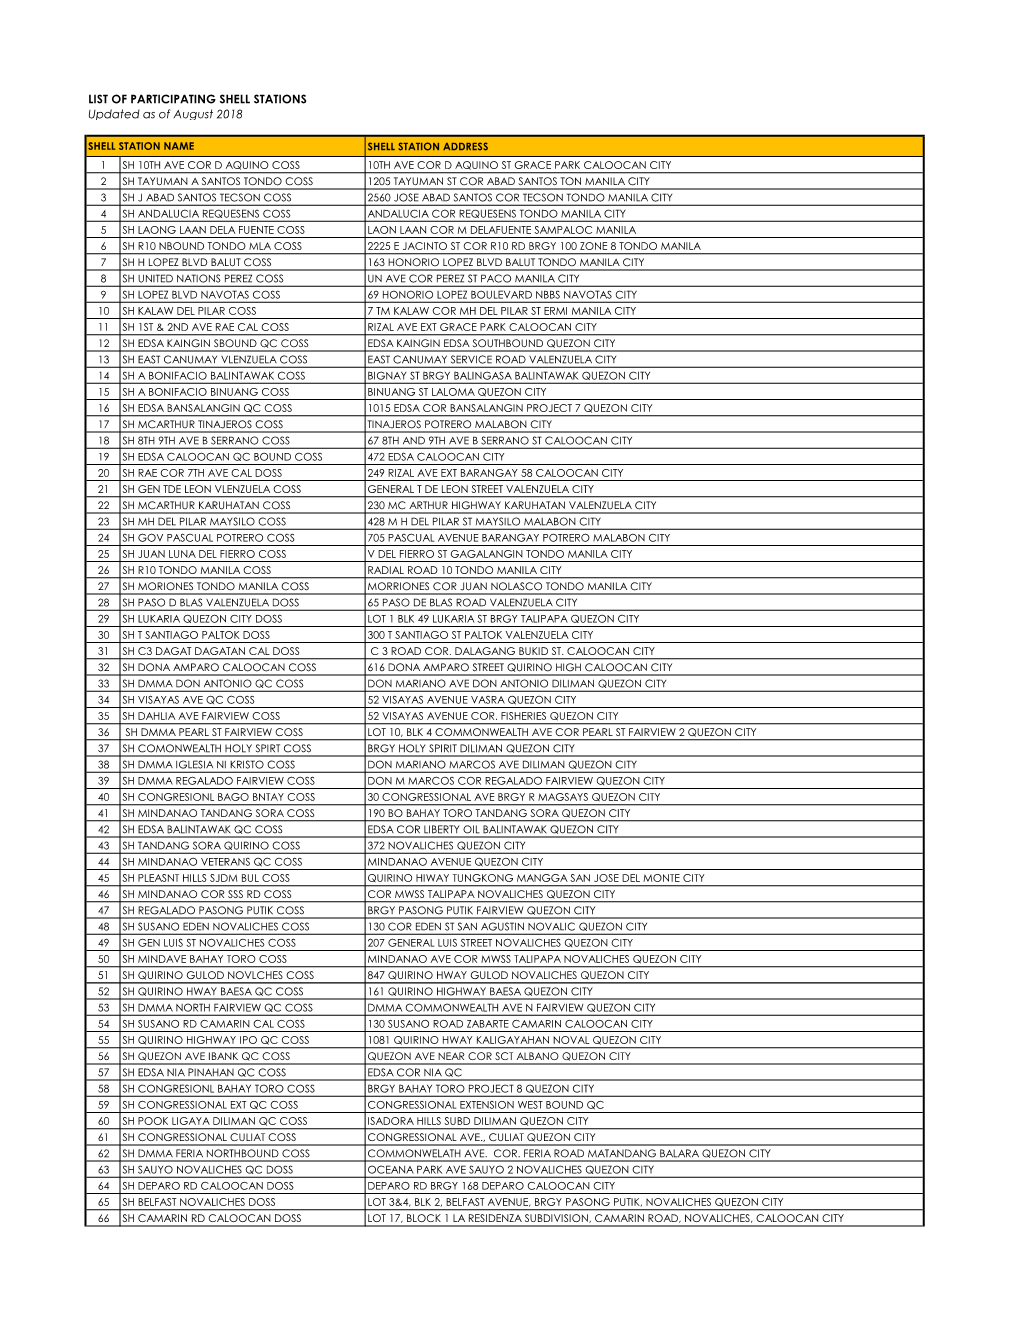 LIST of PARTICIPATING SHELL STATIONS Updated As of August 2018